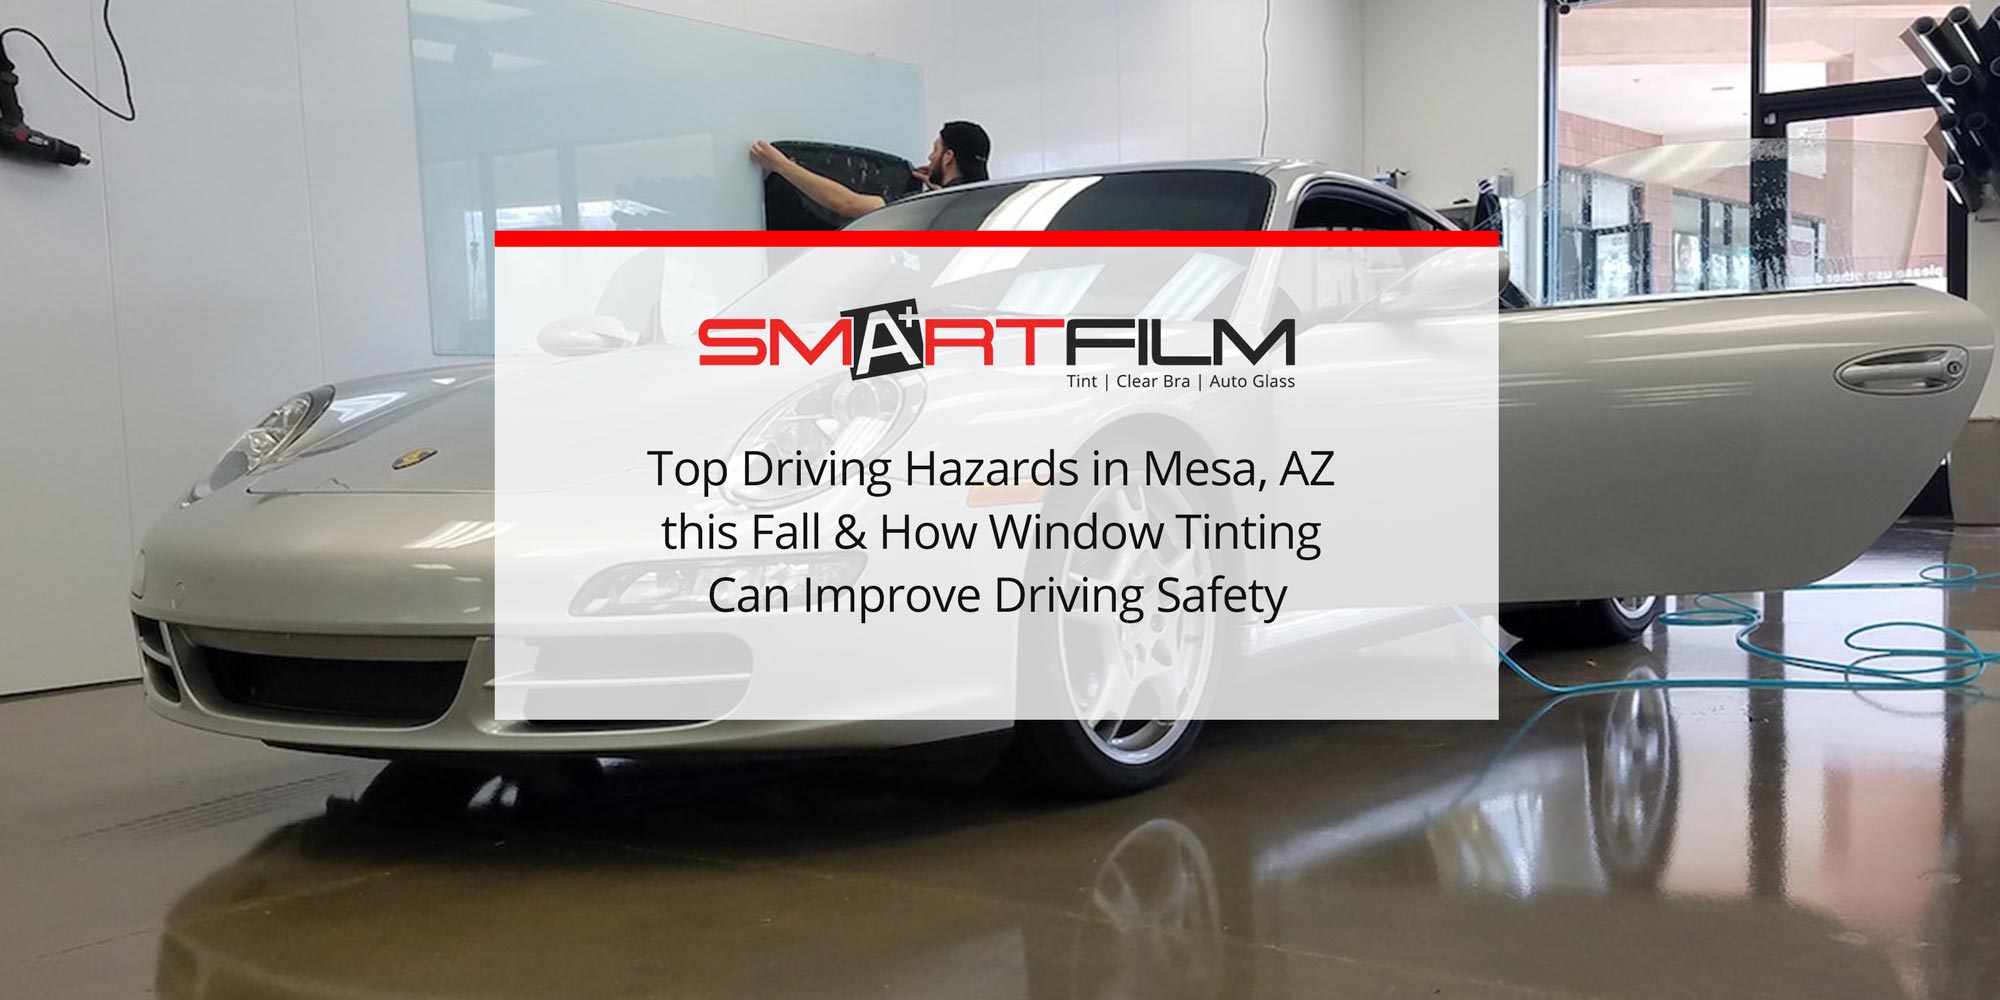 Top Driving Hazards in Mesa, AZ this Fall & How Window Tinting Can Improve Driving Safety